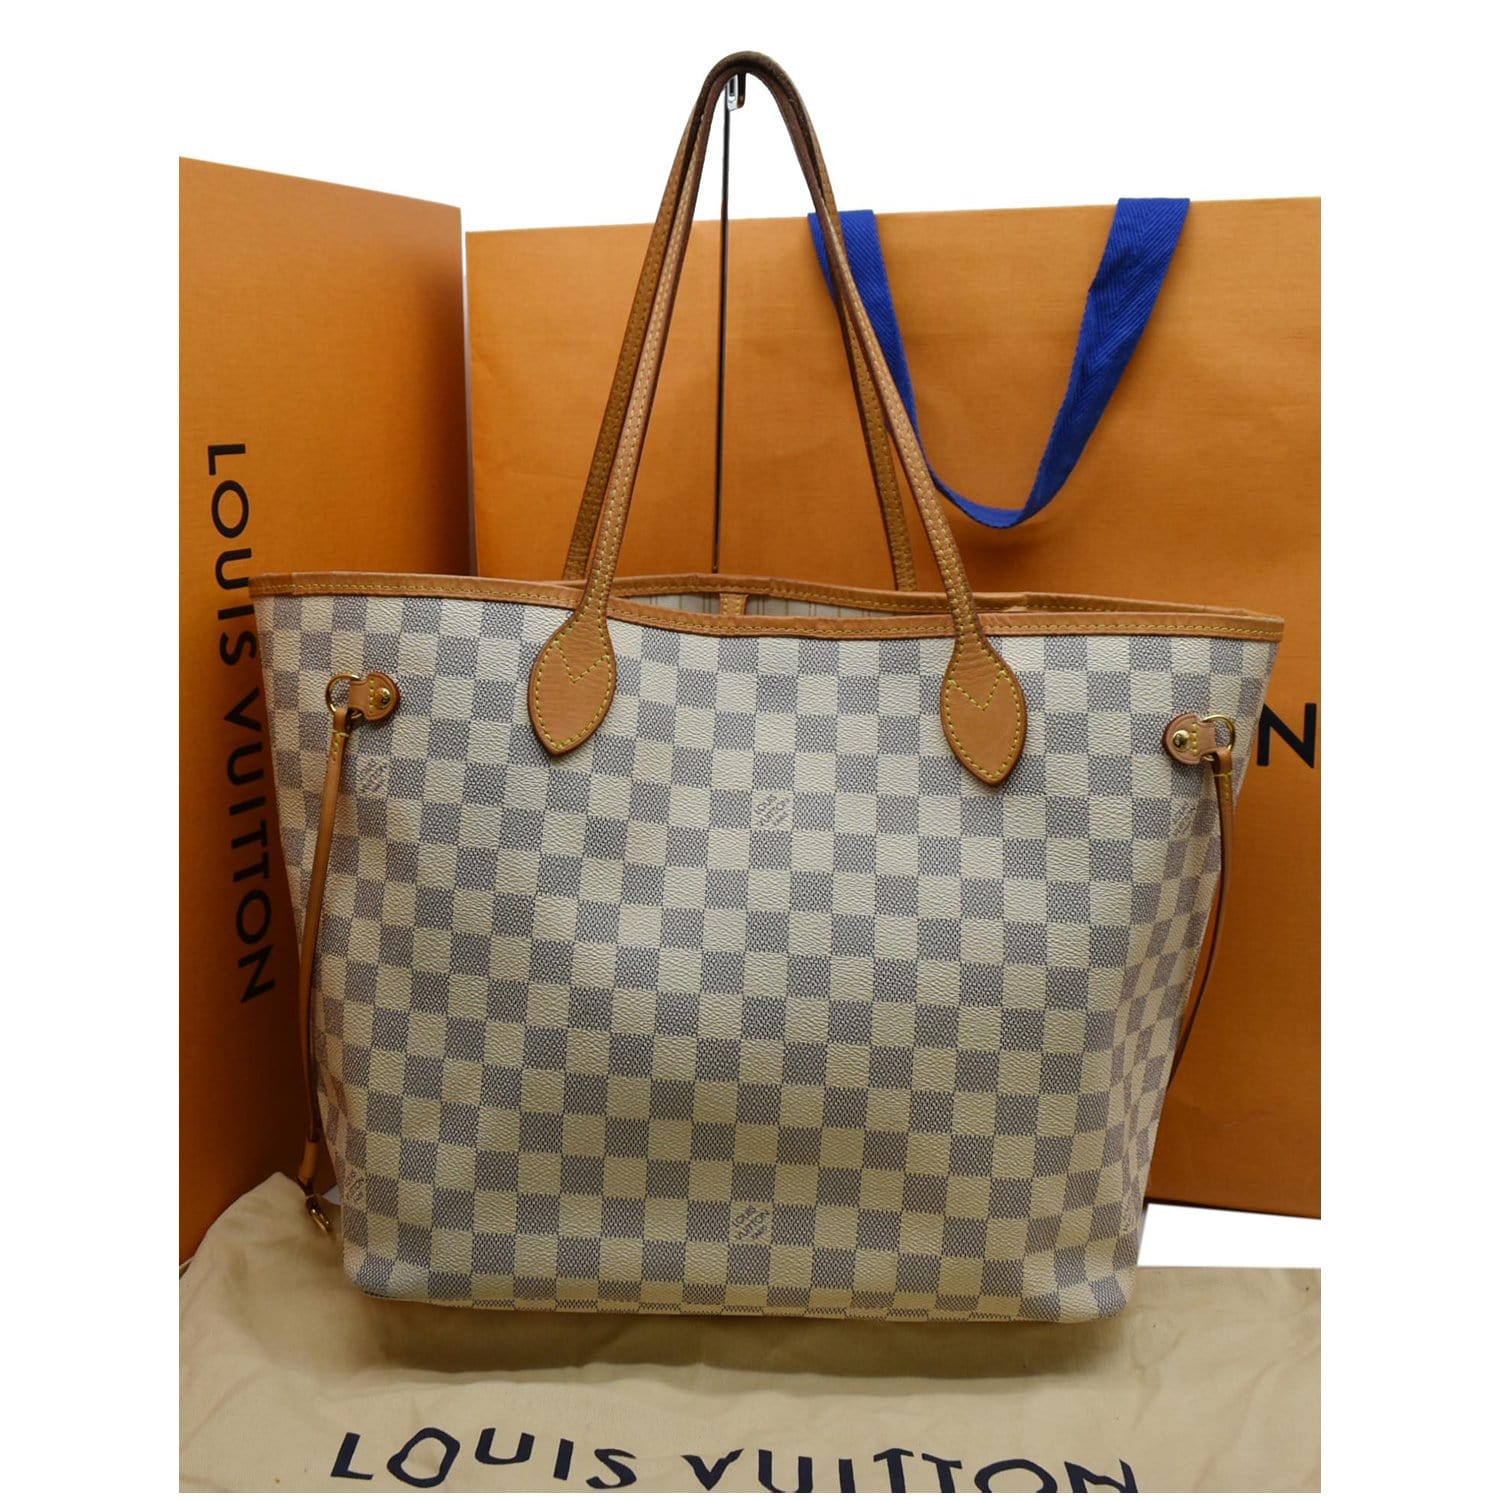 Pre-owned Louis Vuitton Blue/white Damier Azur Neverfull Pm